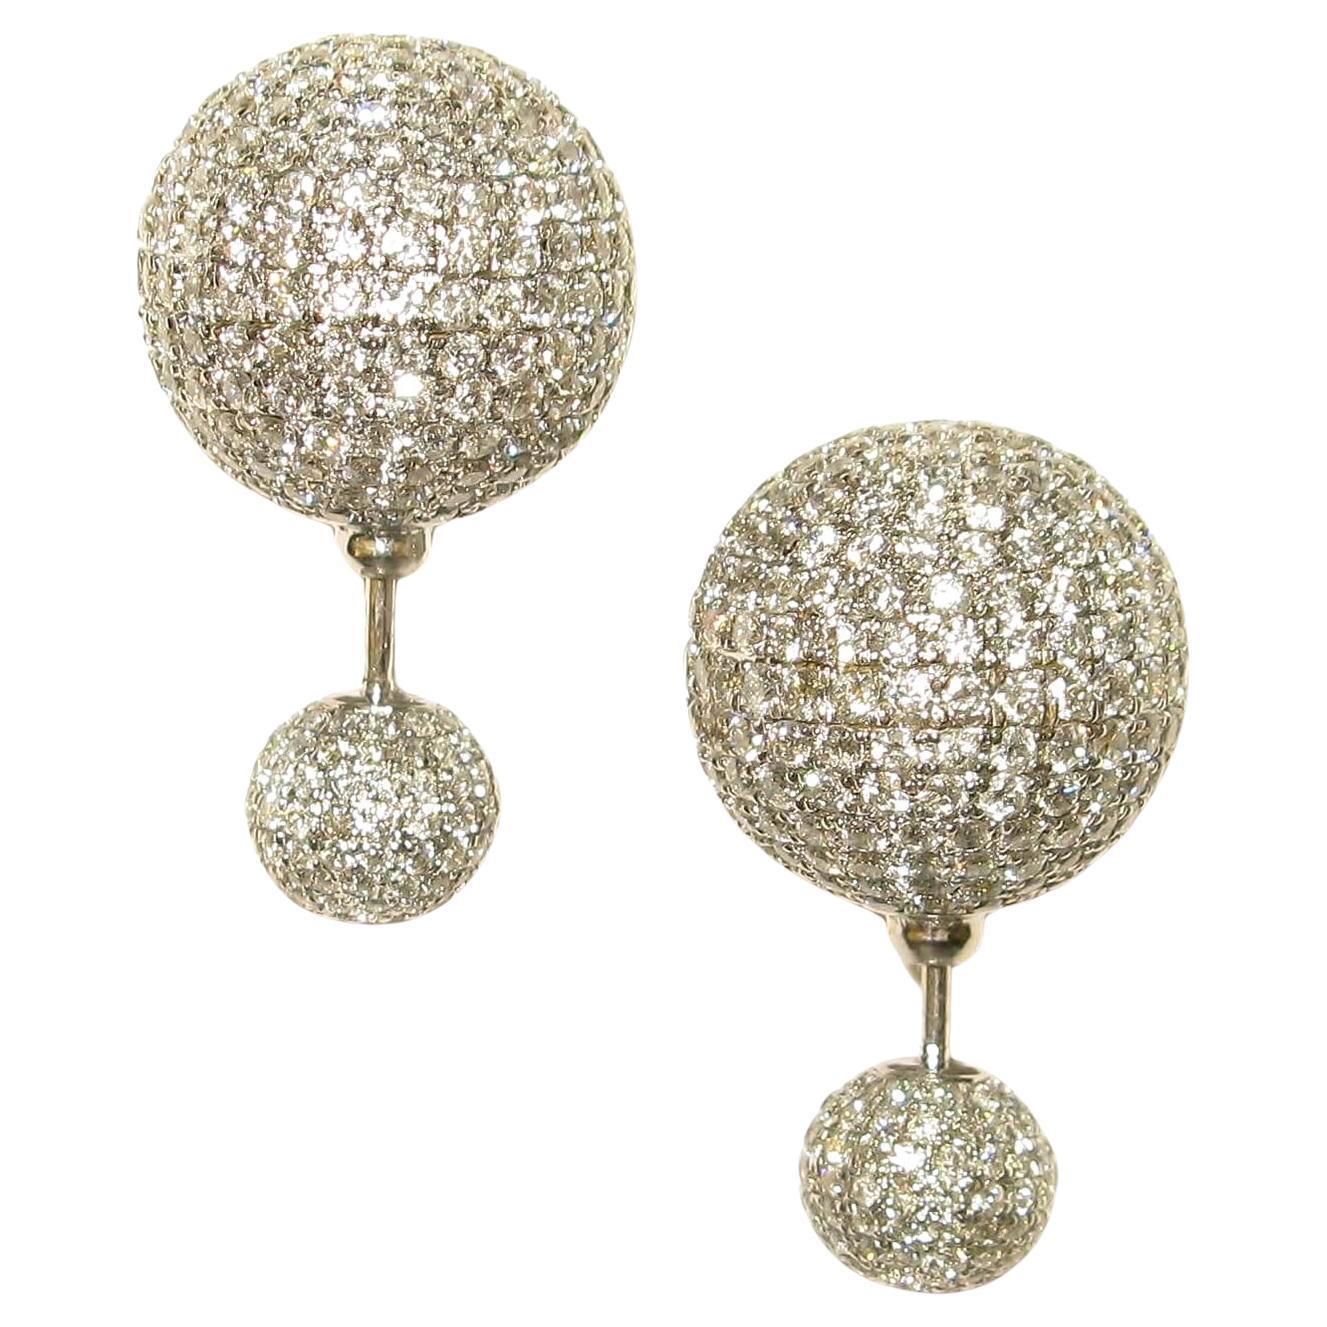 White Pave Diamond Ball Earrings Made In 18k Gold & Silver For Sale